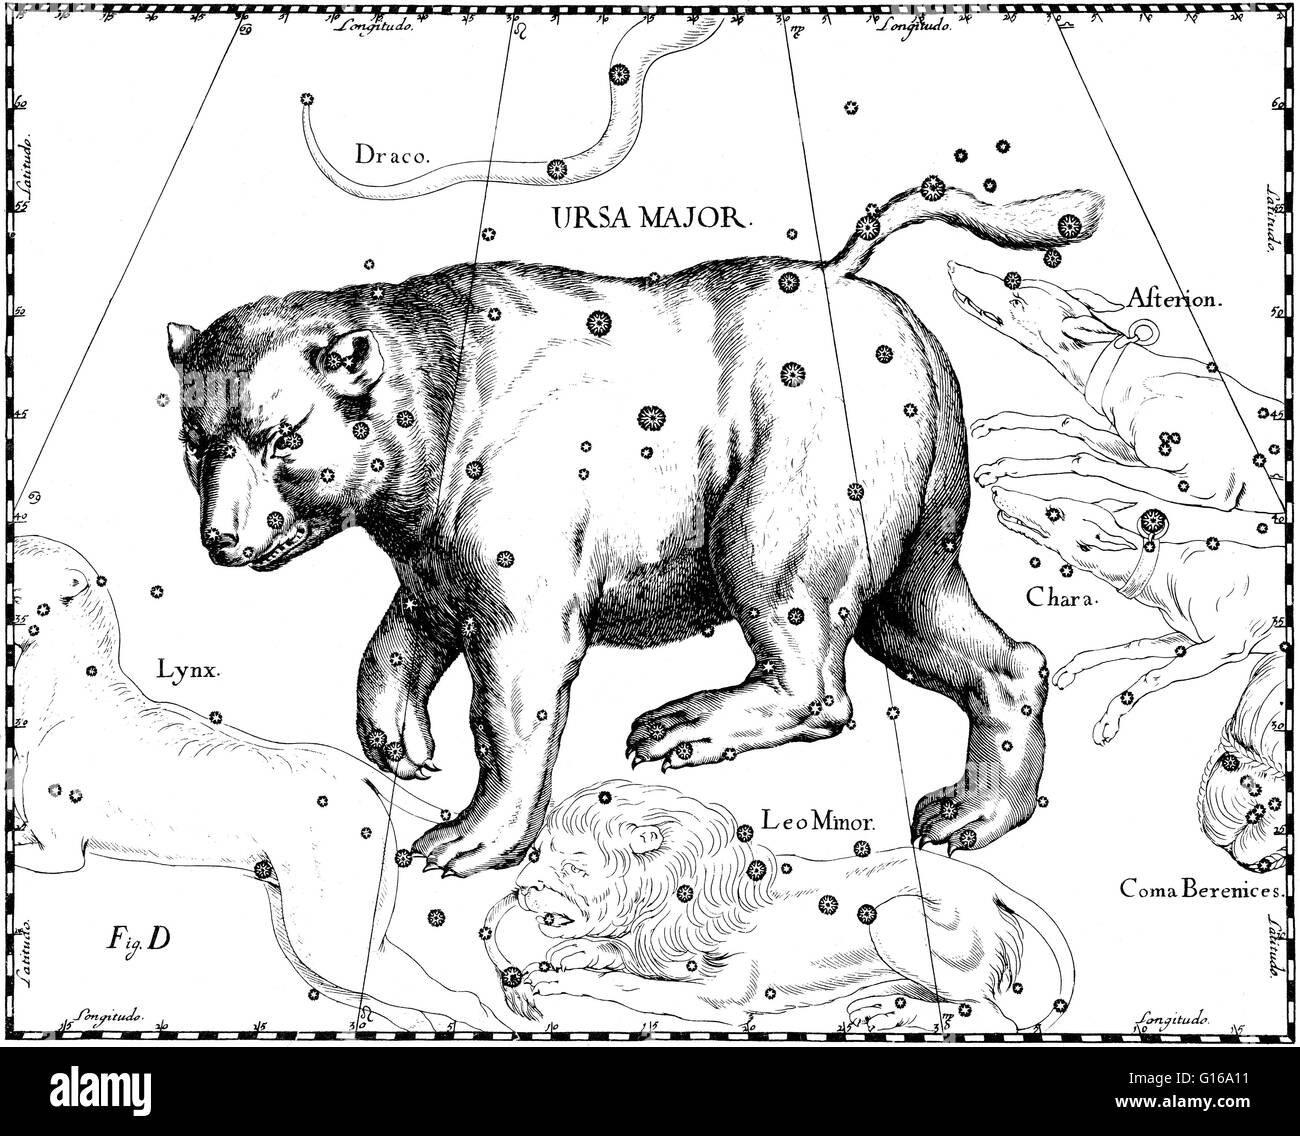 Ursa major constellation from Johannes Hevelius' Prodromus astronomiae, Firmamentum Sobiescianum, sive Uranographia, 1687. Ursa Major, also known as the Great Bear, is a constellation visible throughout the year in most of the northern hemisphere. It was Stock Photo